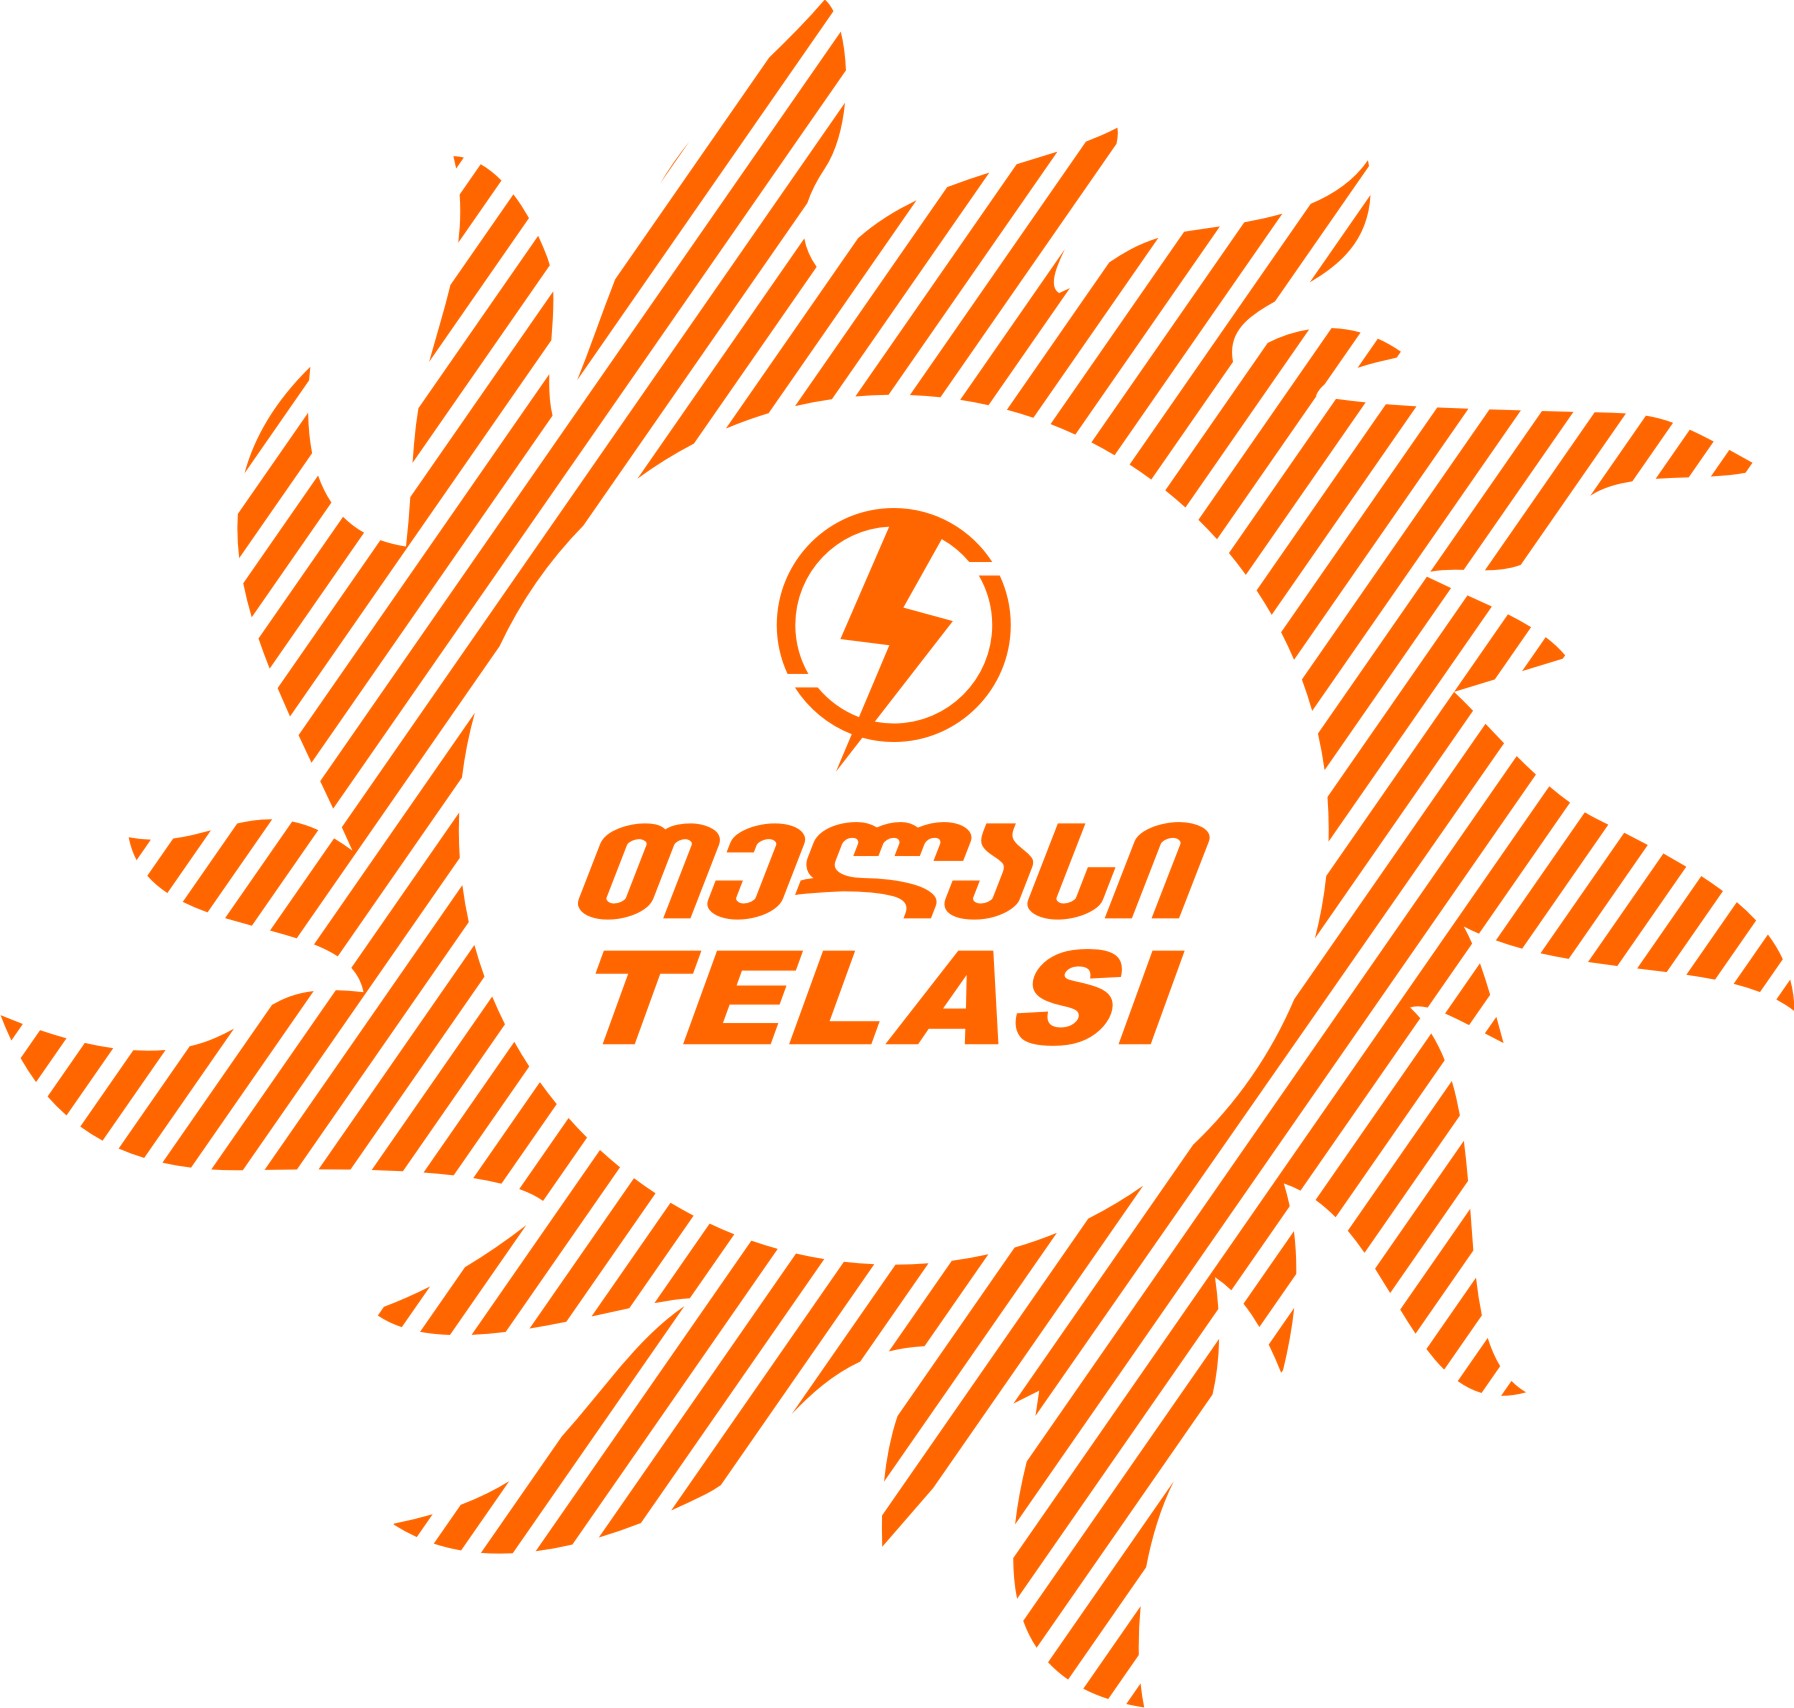 Russia's Inter RAO appoints new Telasi CEO